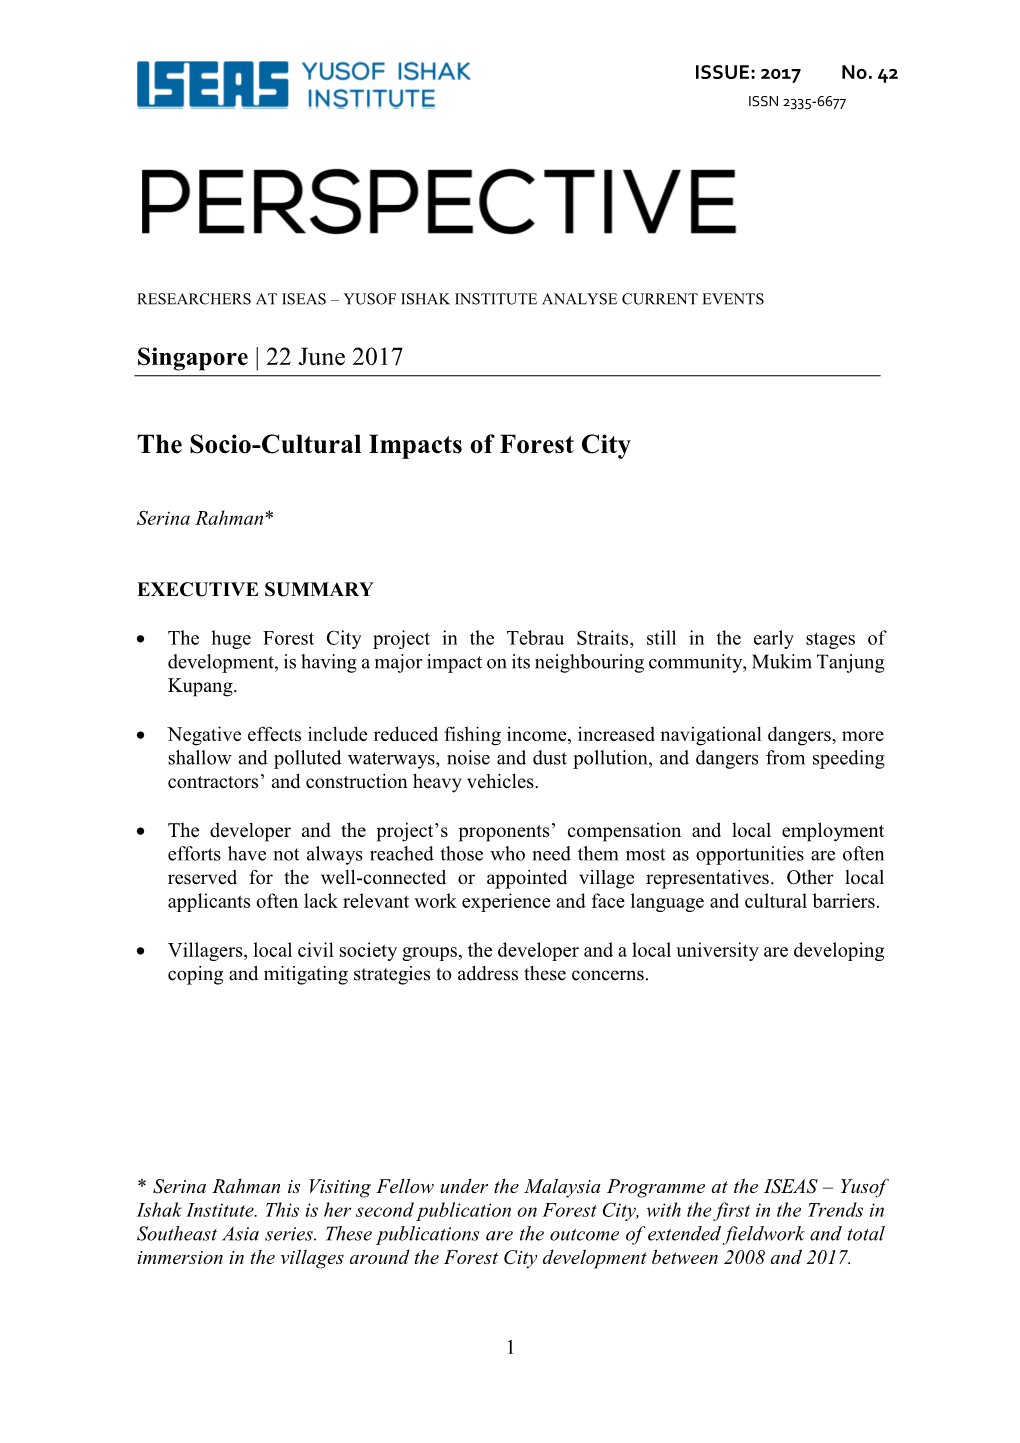 The Socio-Cultural Impacts of Forest City